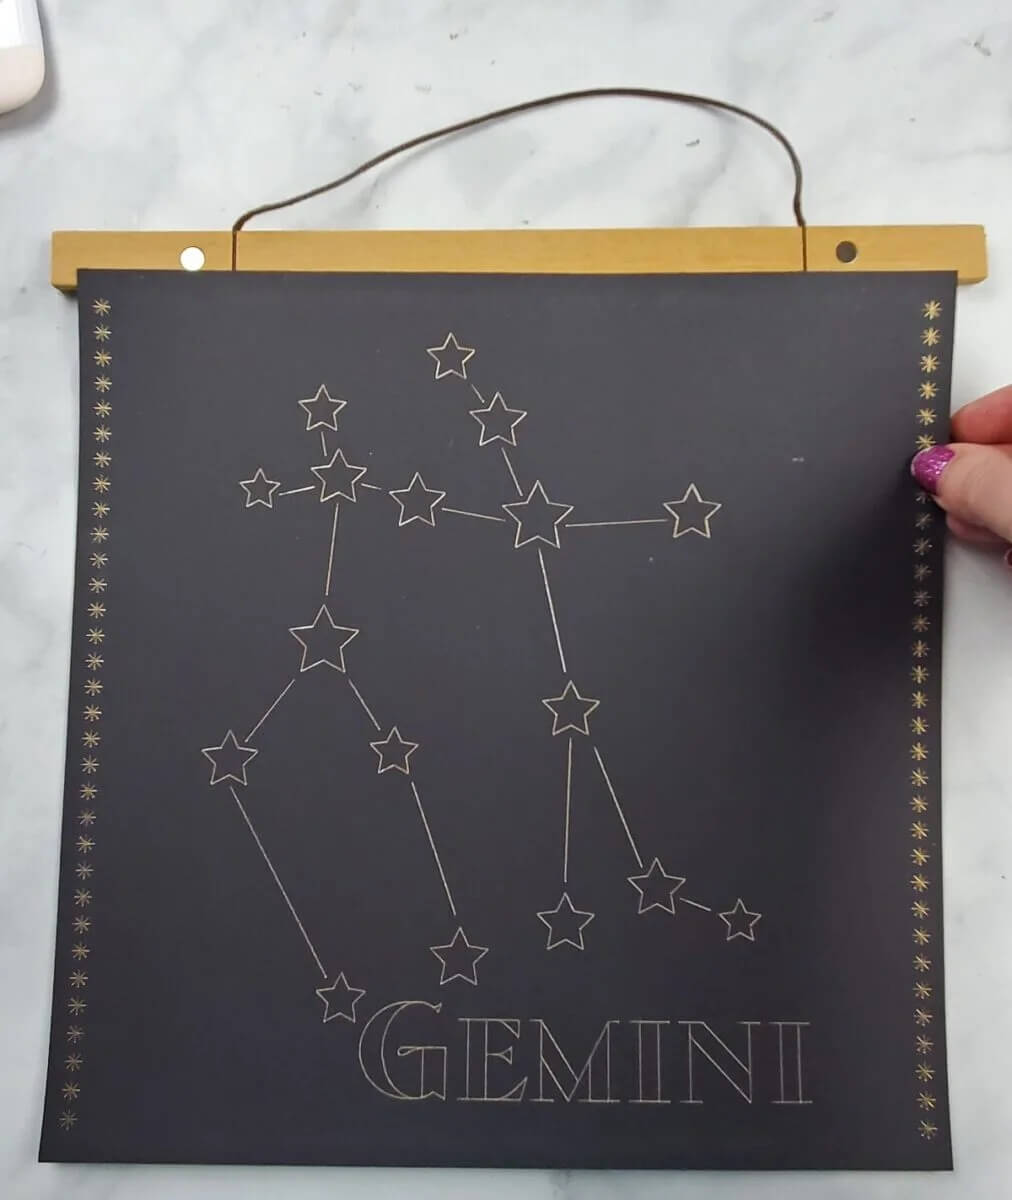 Handmade Astrology Art Project With Cardstock & Cricut For Wall Decor